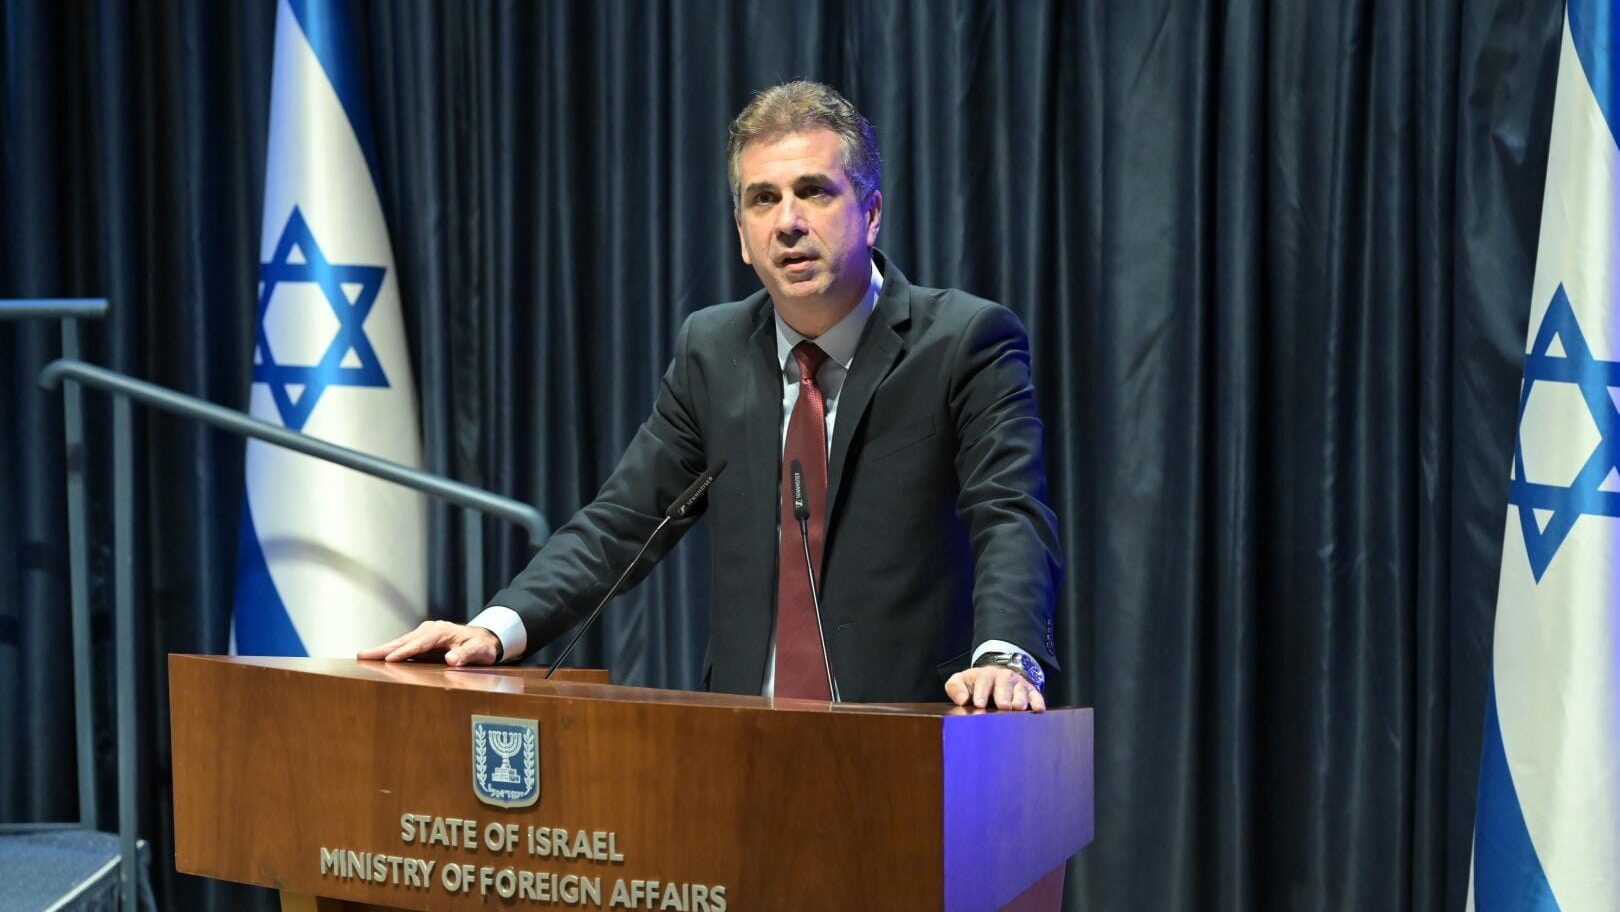 Israeli Foreign Minister: Hamas Will Pay a Heavy Price; Compares Hamas to ISIS, Nazis